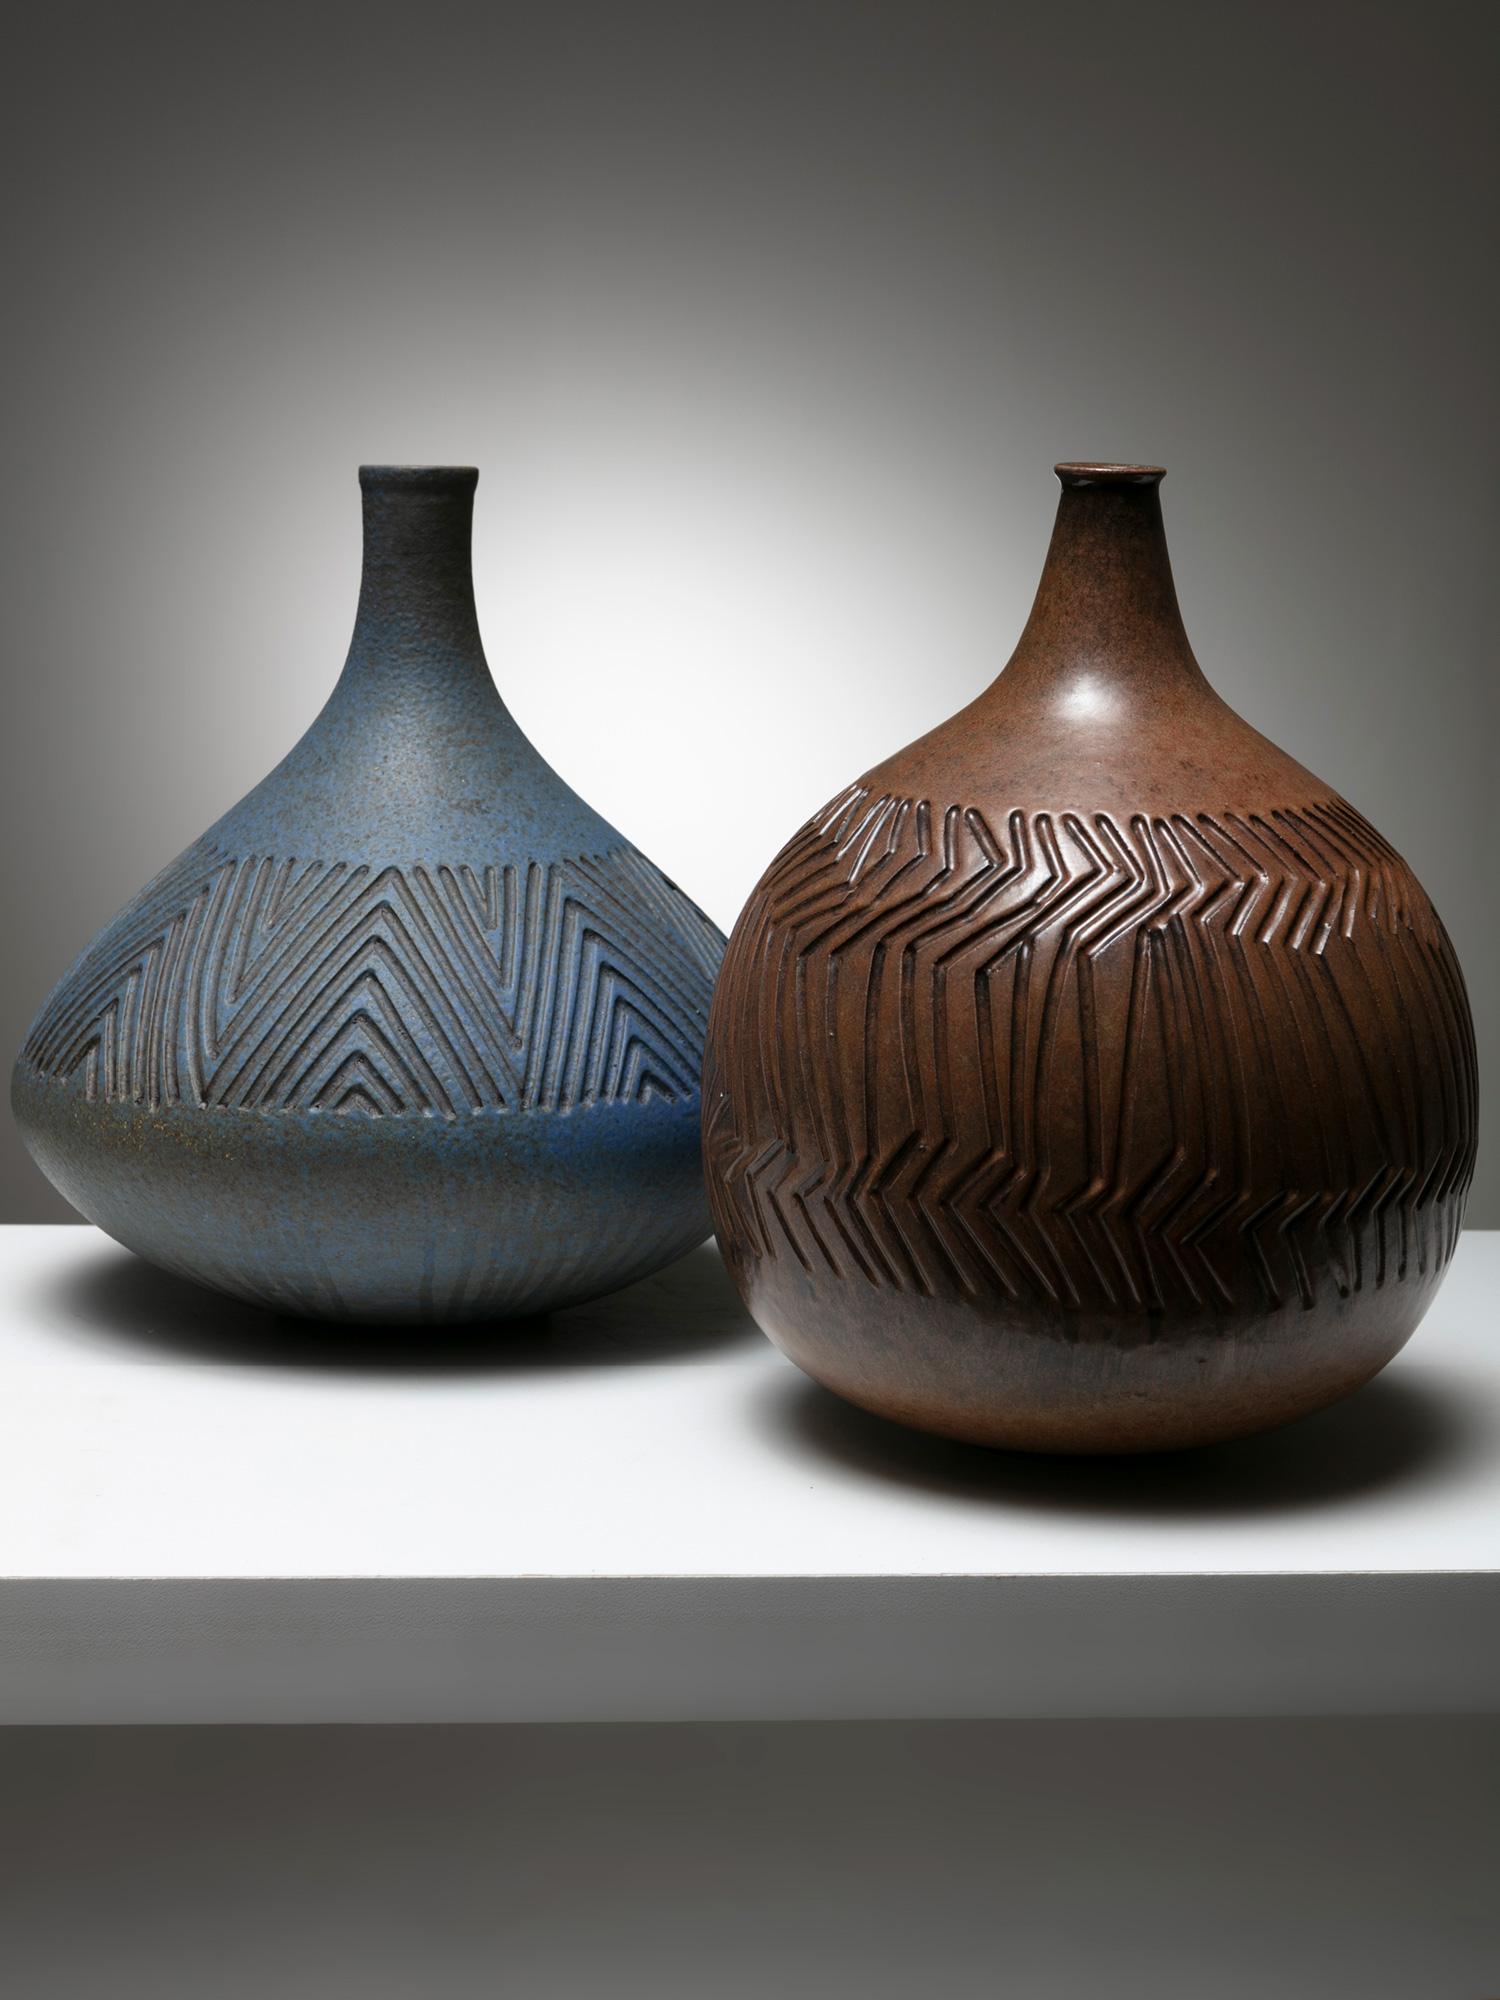 Sturdy ceramic vases with detailed geometric surface texture.
Slight different shapes and sizes.